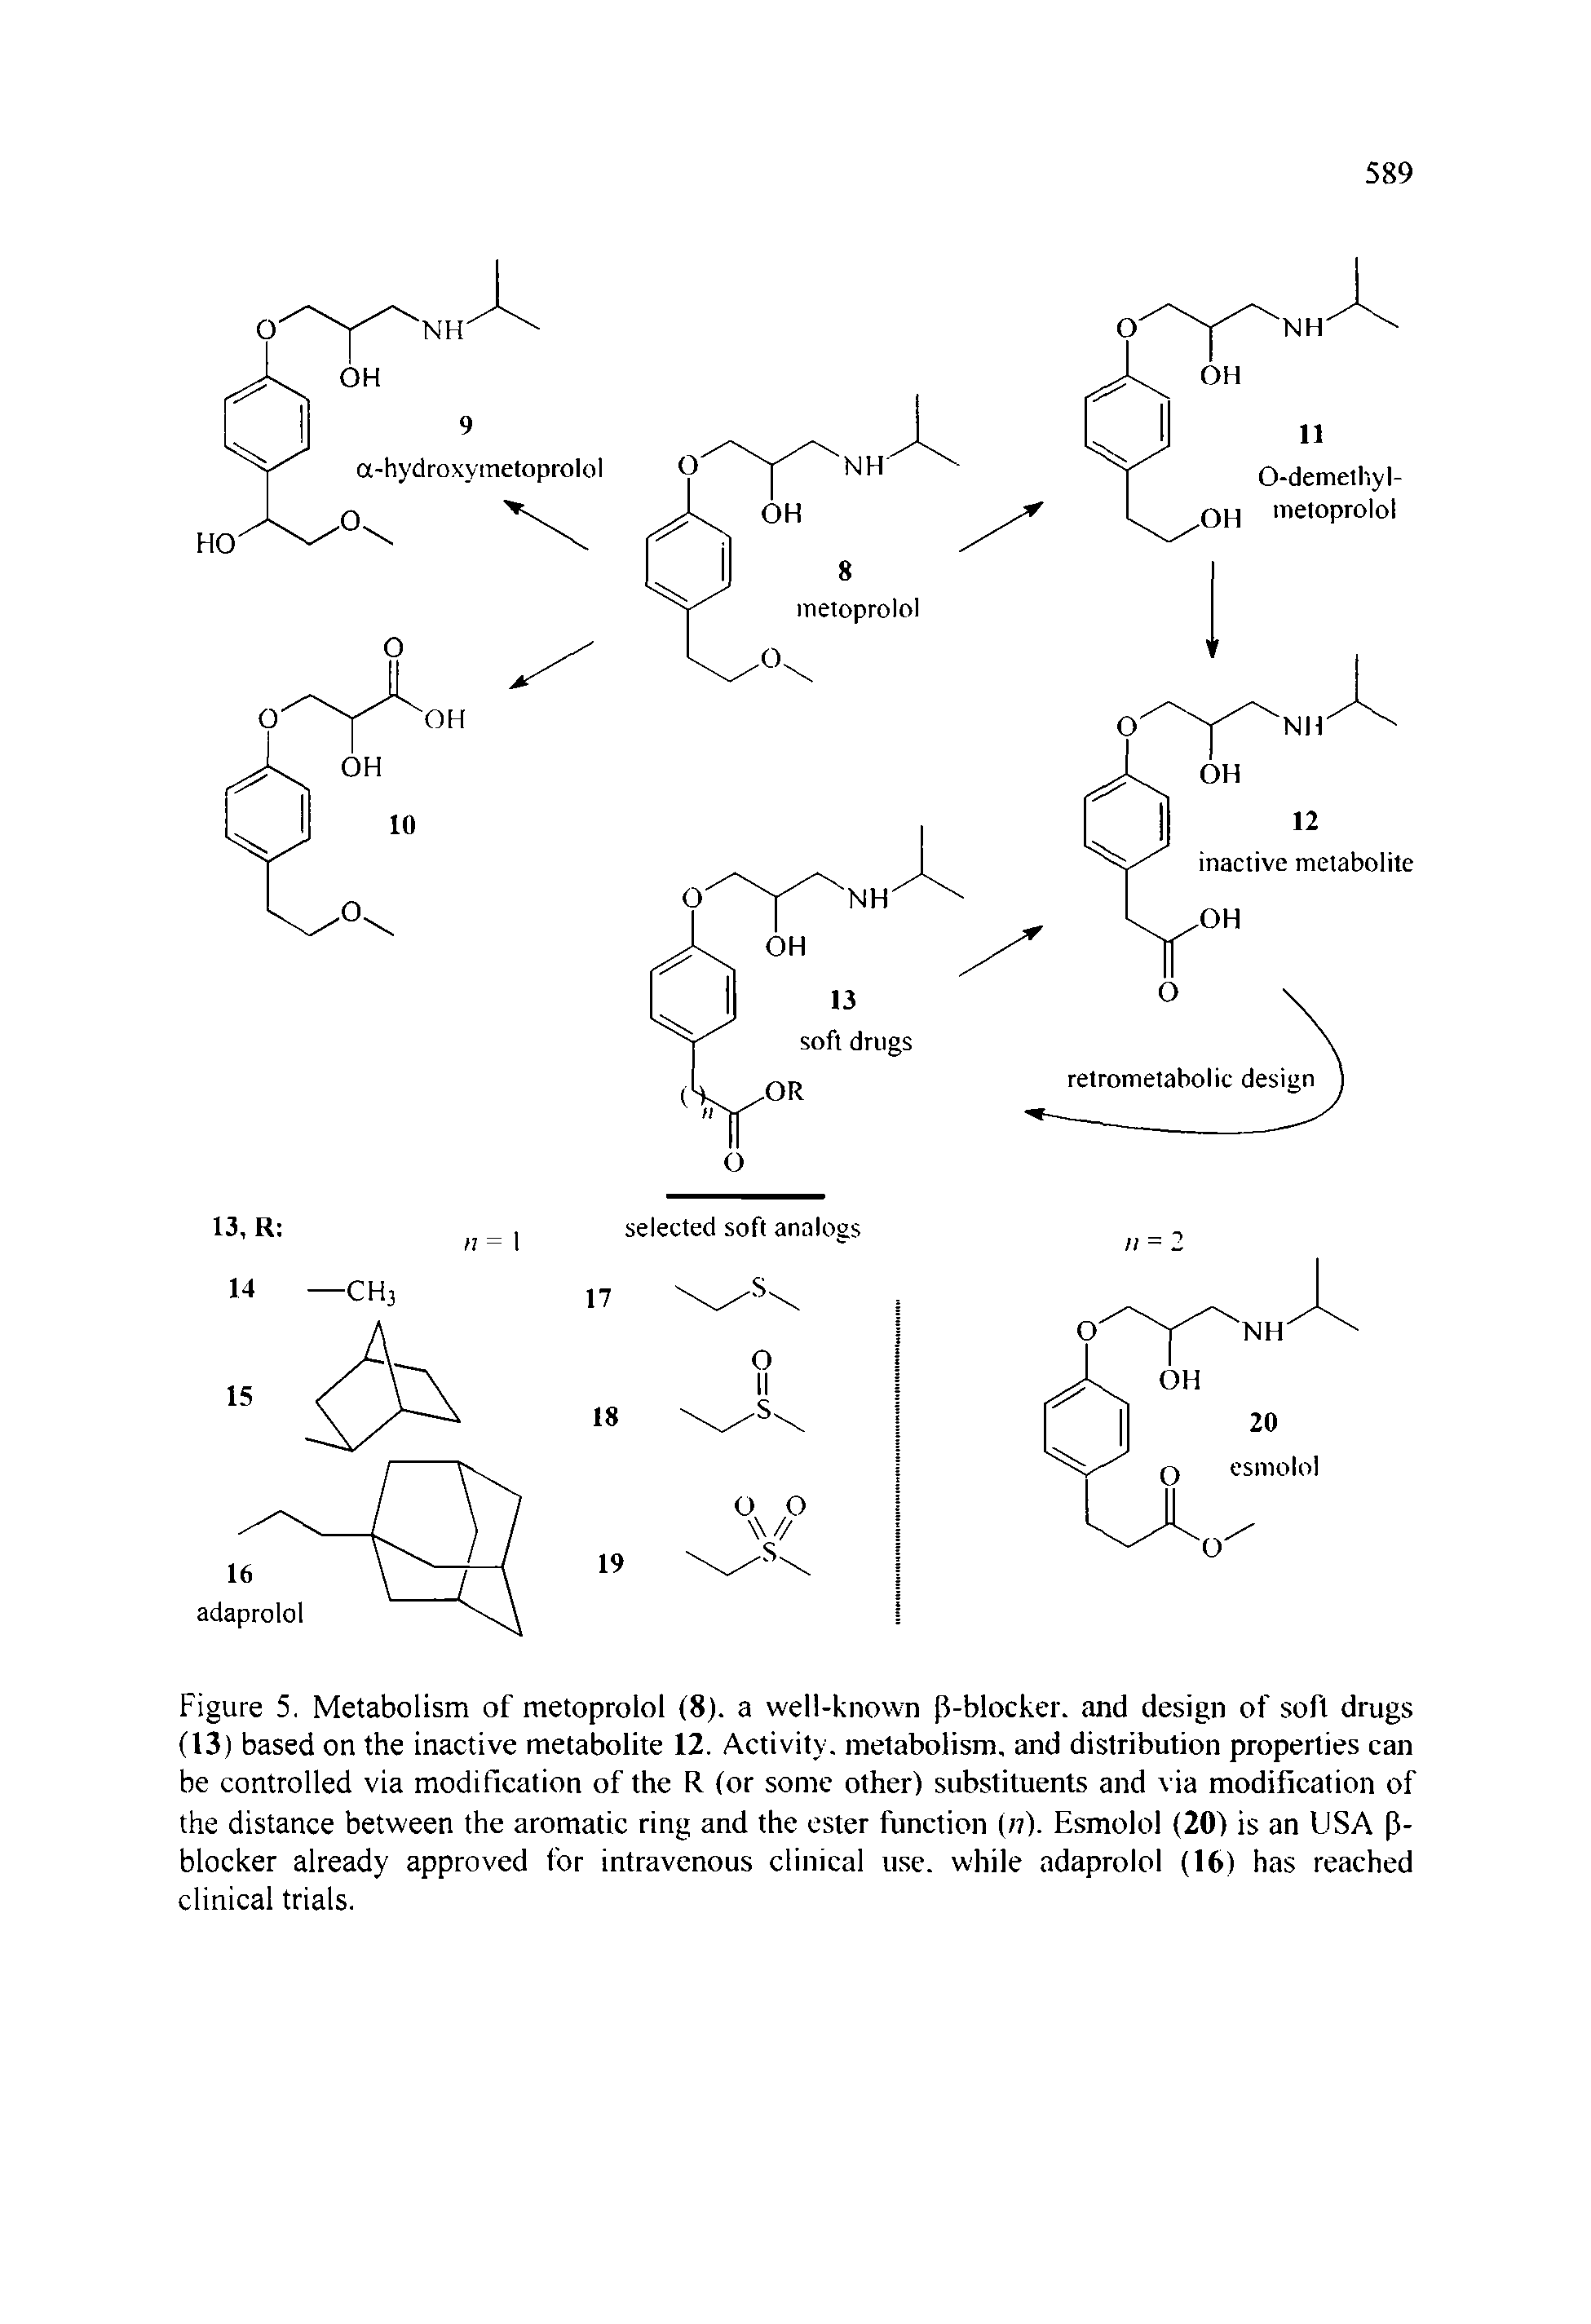 Figure 5. Metabolism of metoprolol (8). a well-known p-blocker. and design of soft drugs (13) based on the inactive metabolite 12. Activity, metabolism, and distribution properties can be controlled via modification of the R (or some other) substituents and via modification of the distance between the aromatic ring and the ester function (77). Esmolol (20) is an USA P-blocker already approved for intravenous clinical use. while adaprolol (16) has reached clinical trials.